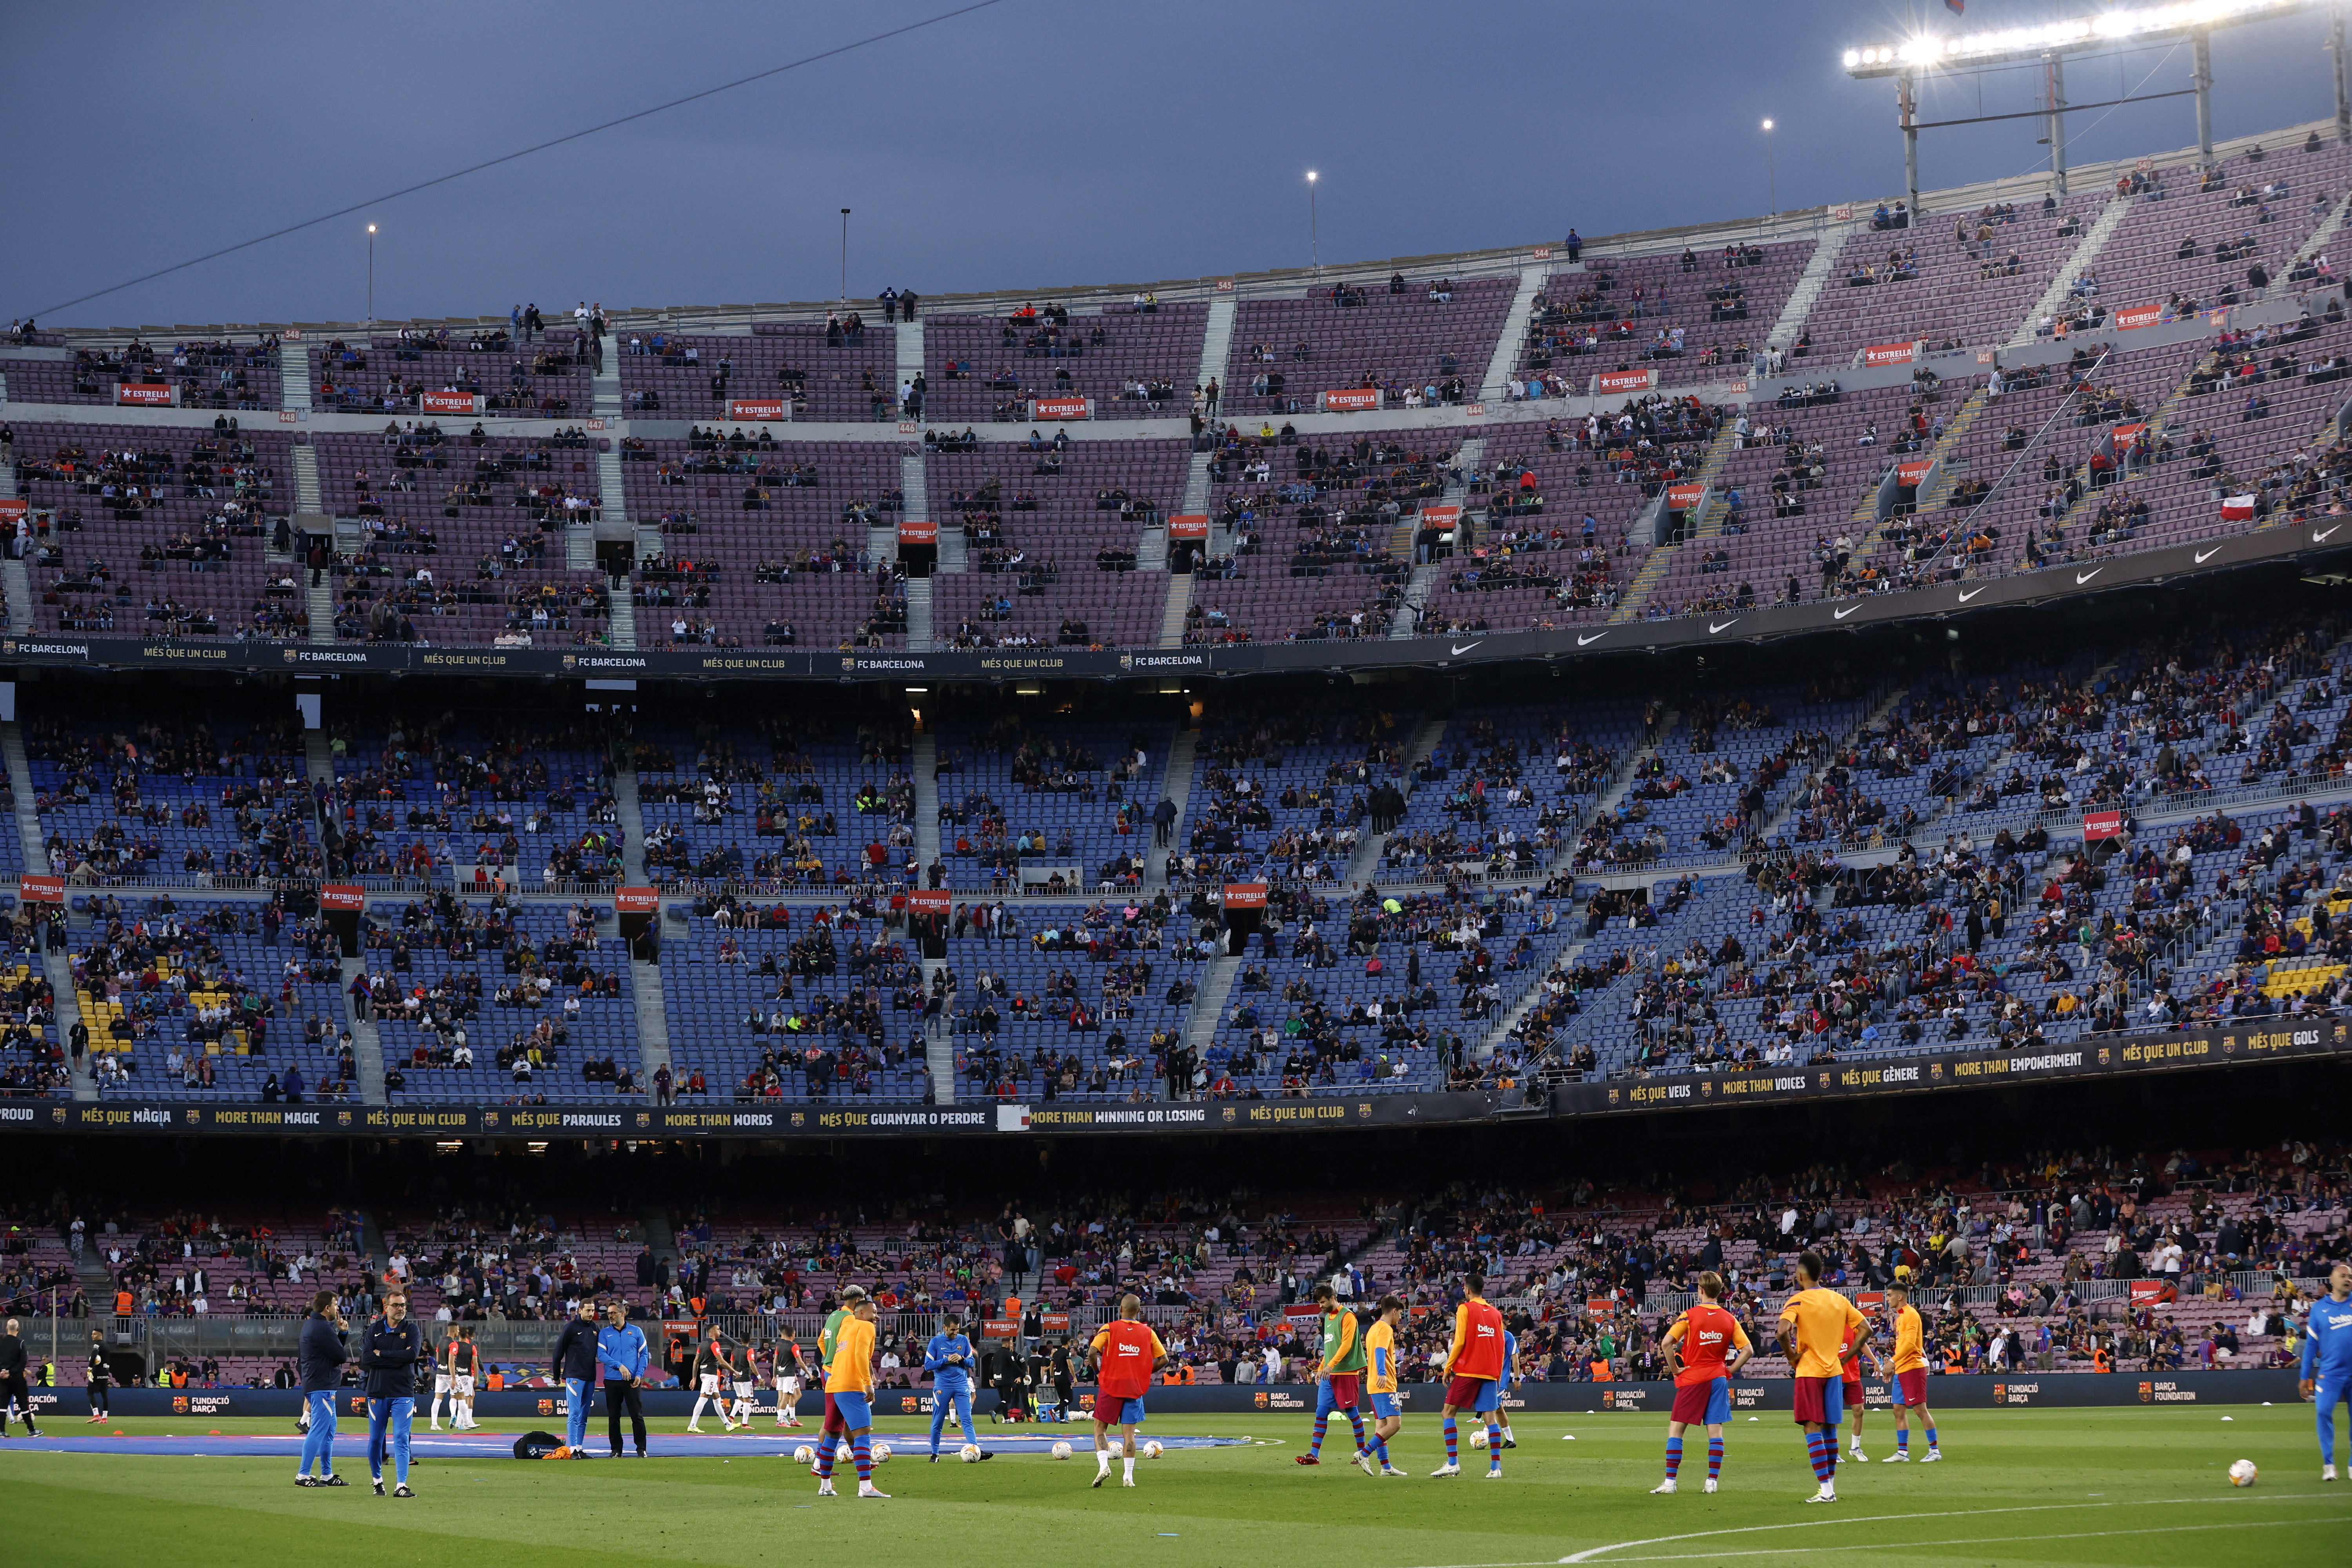 The Camp Nou prepares to receive the Barcelona squad for the following season 